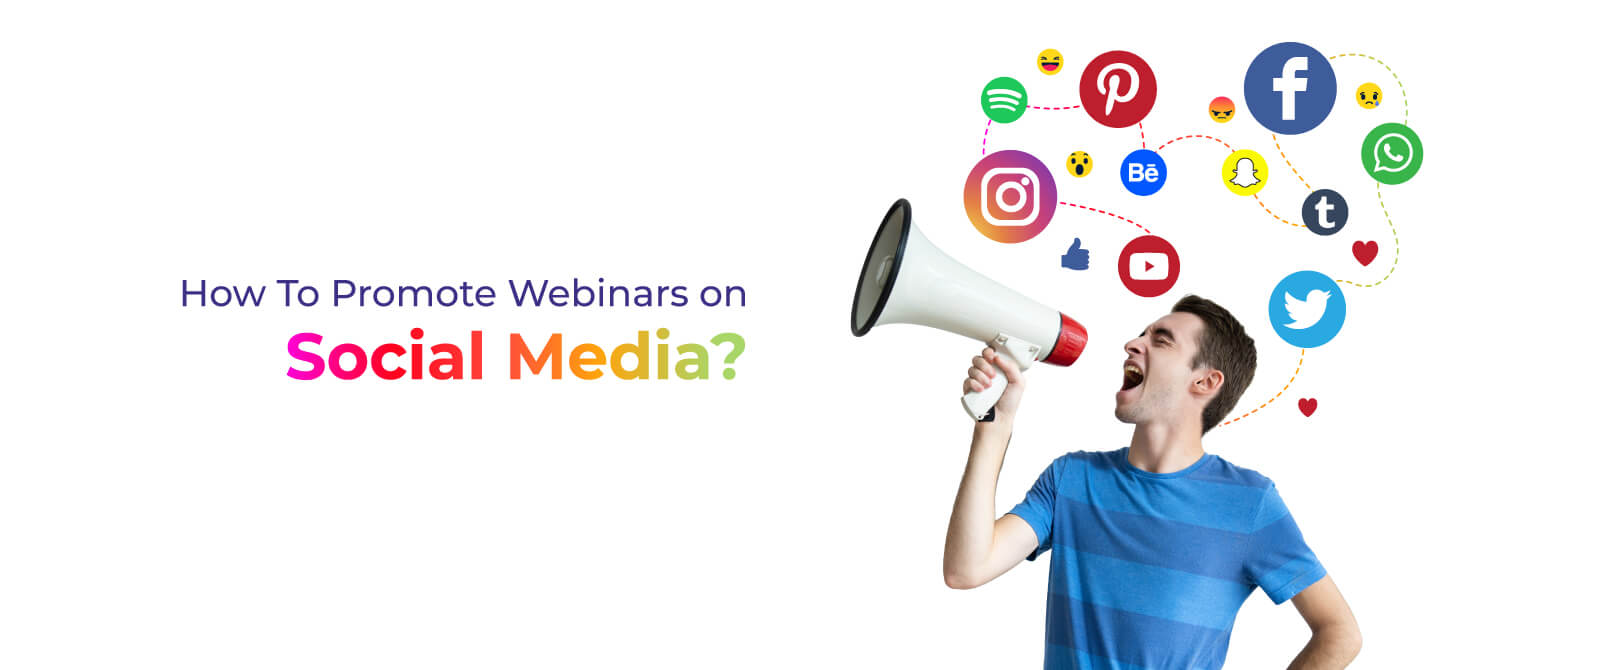 How To Promote Webinars on Social Media ? Tips For Sure-Shot Success